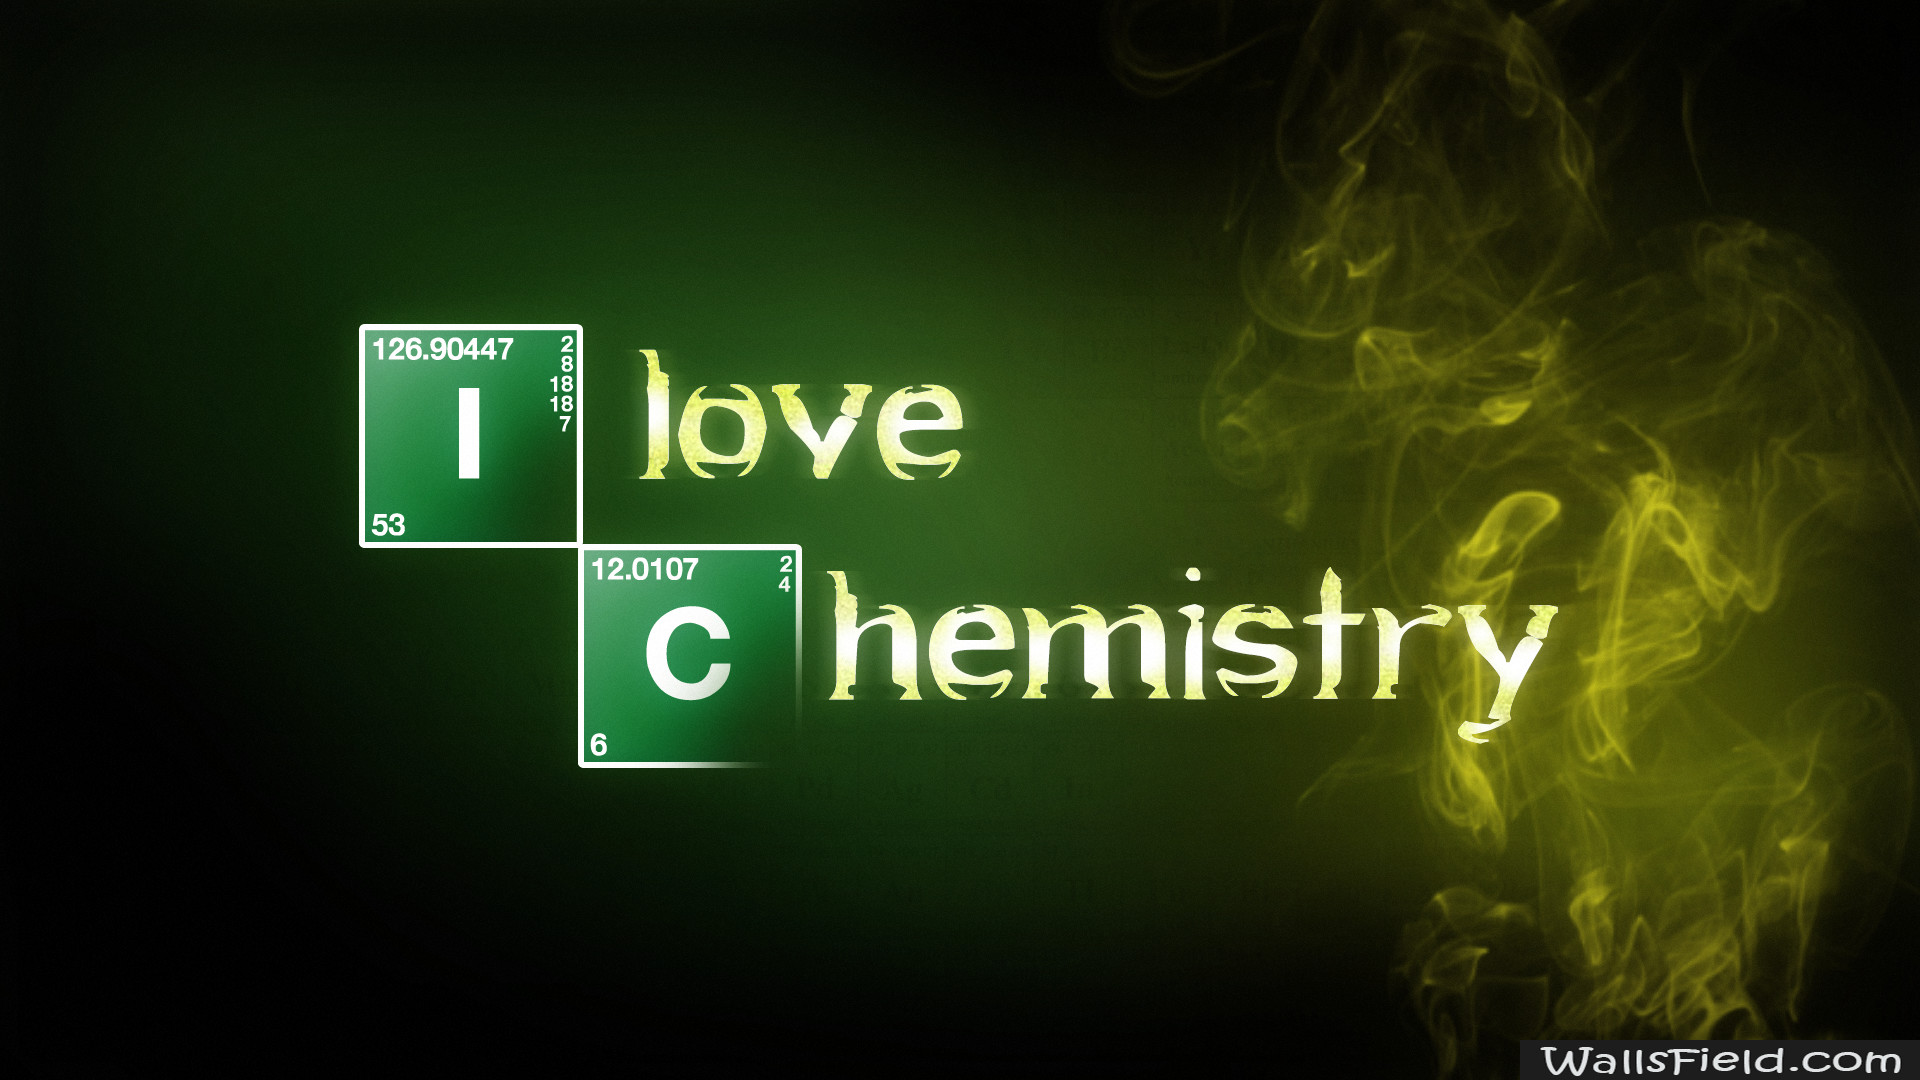 1920x1080, You Can View, Download And Comment On I - Love Chemistry Breaking Bad - HD Wallpaper 